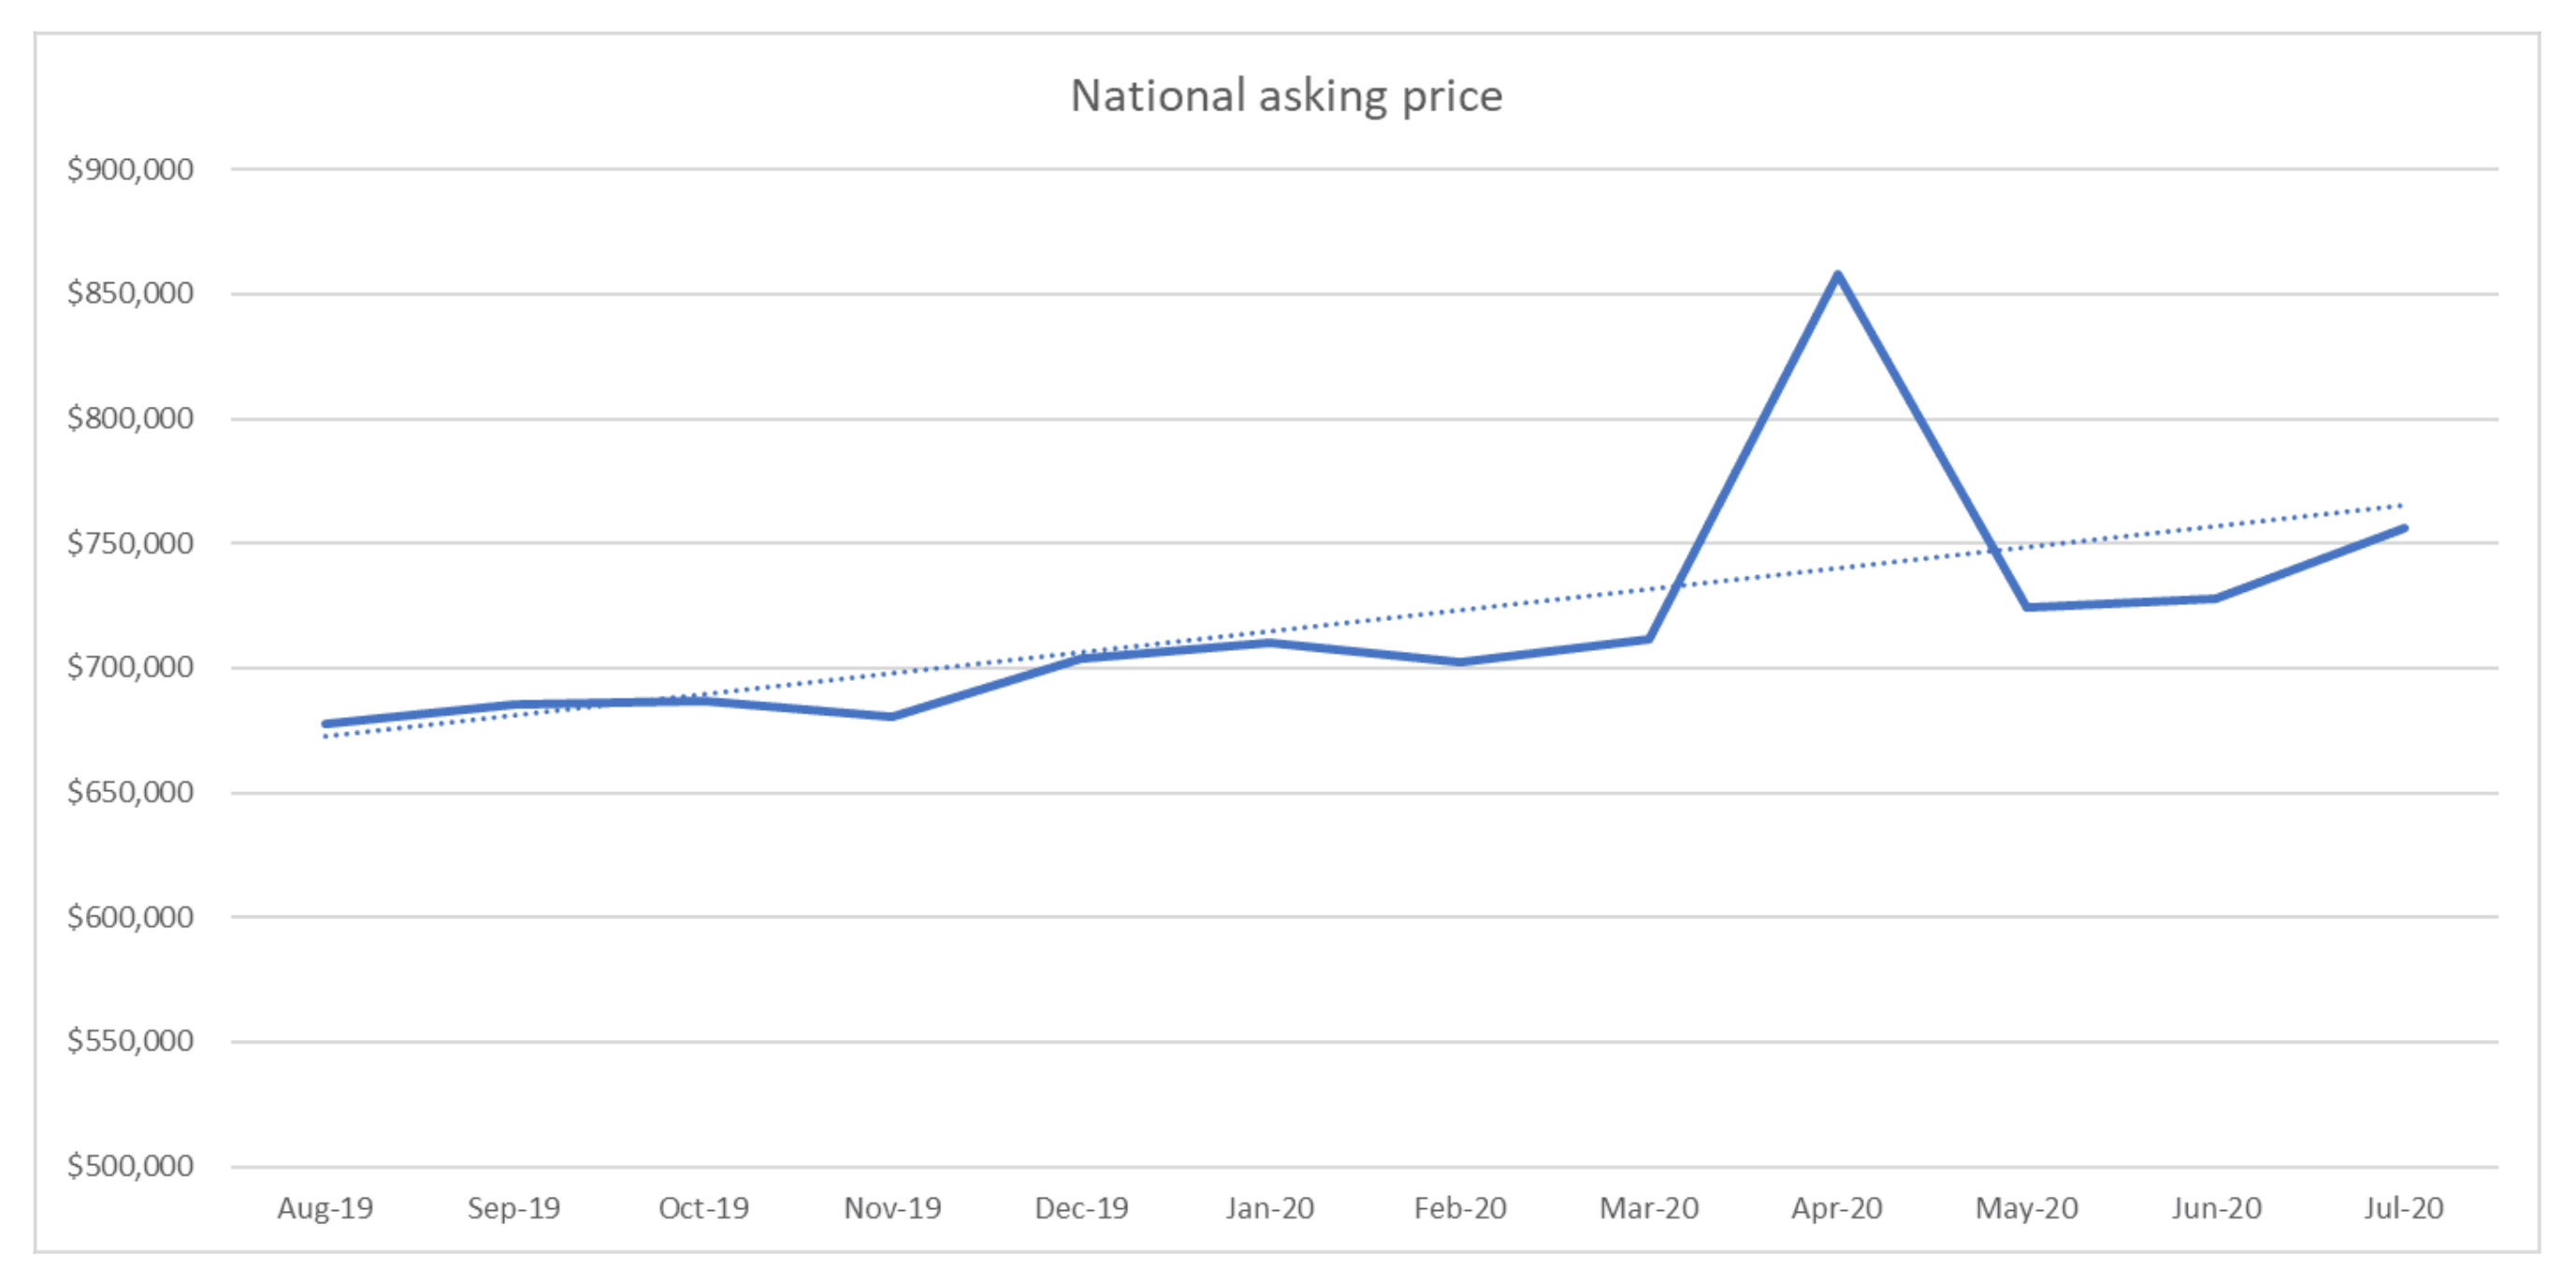 National average asking price over time